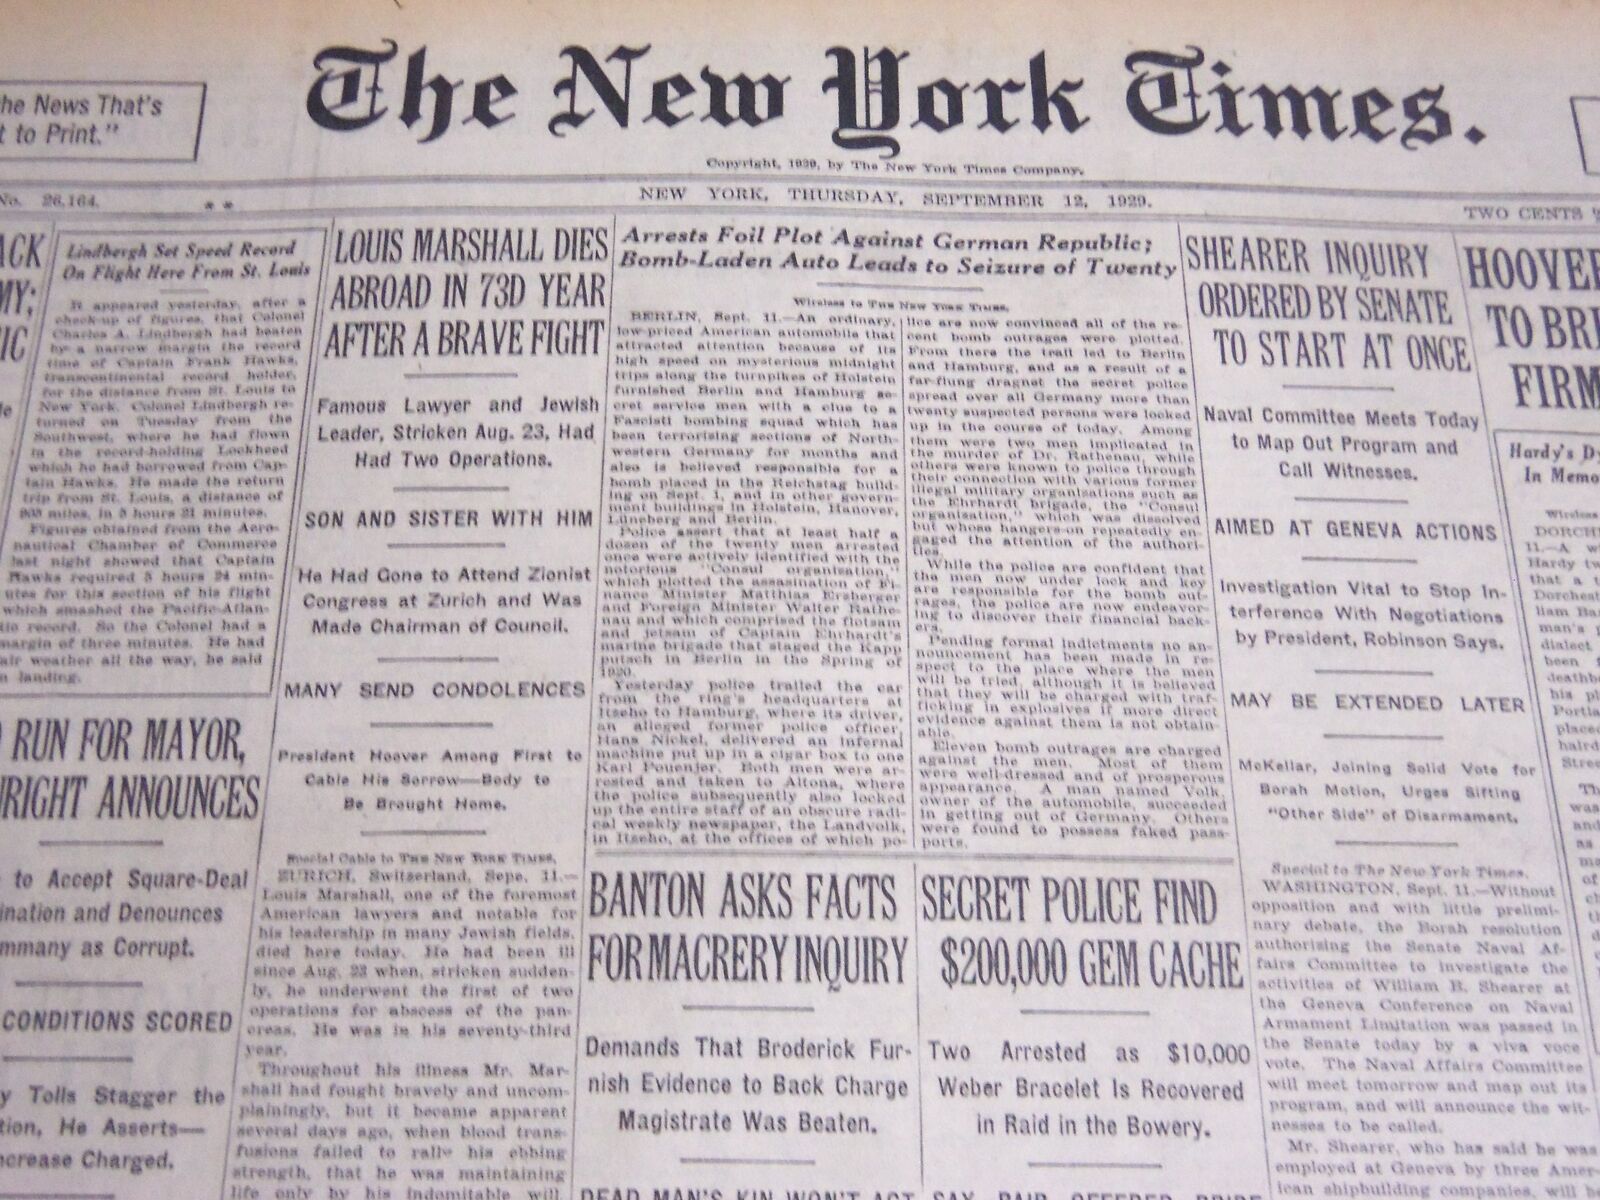 1929 SEPTEMBER 12 NEW YORK TIMES - LOUIS MARSHALL DIES ABROAD AT 73 - NT 6901